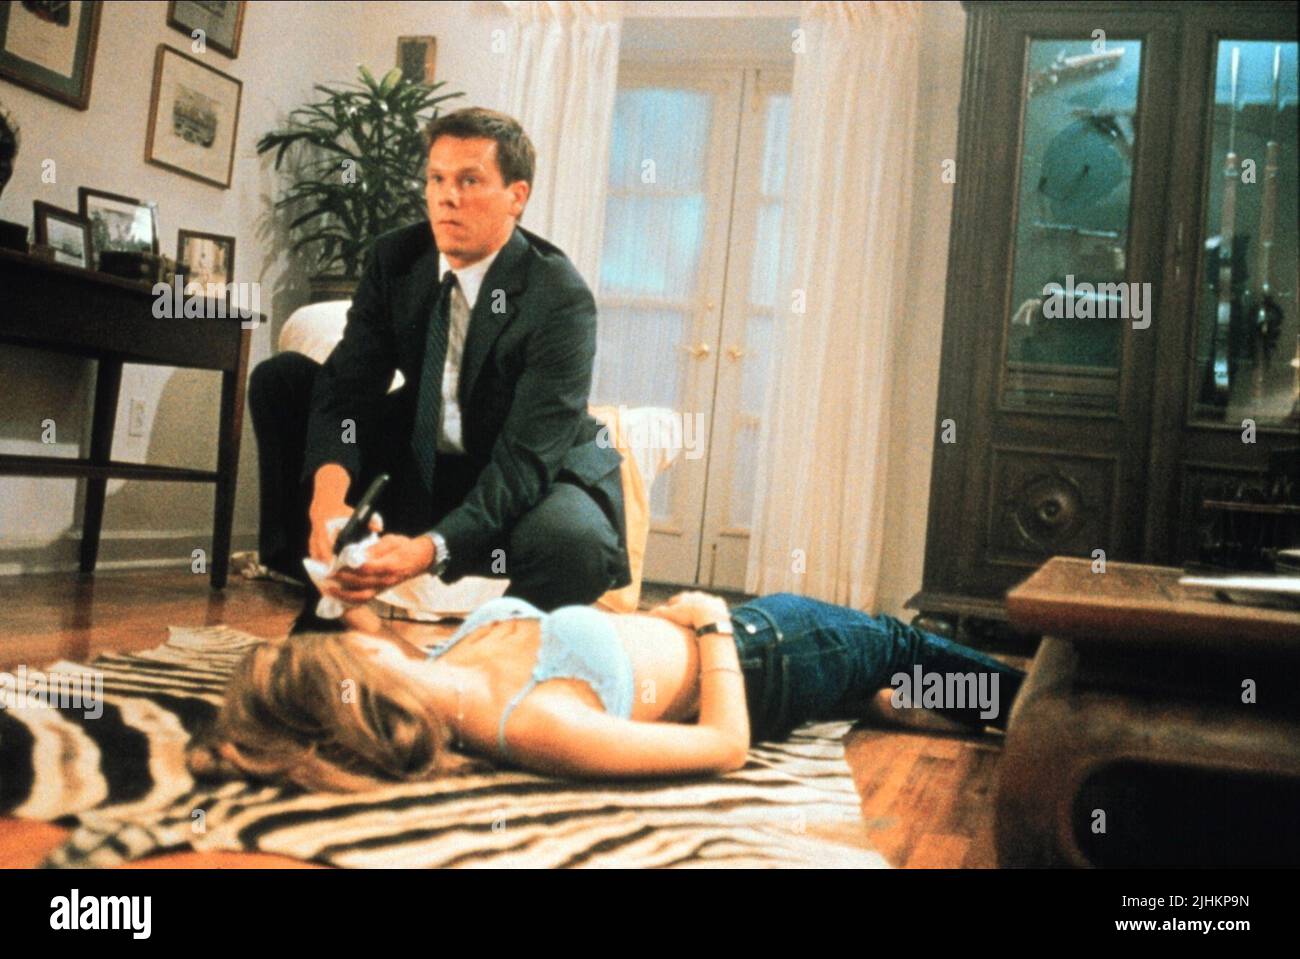 KEVIN BACON, Denise Richards, cose selvagge, 1998 Foto Stock